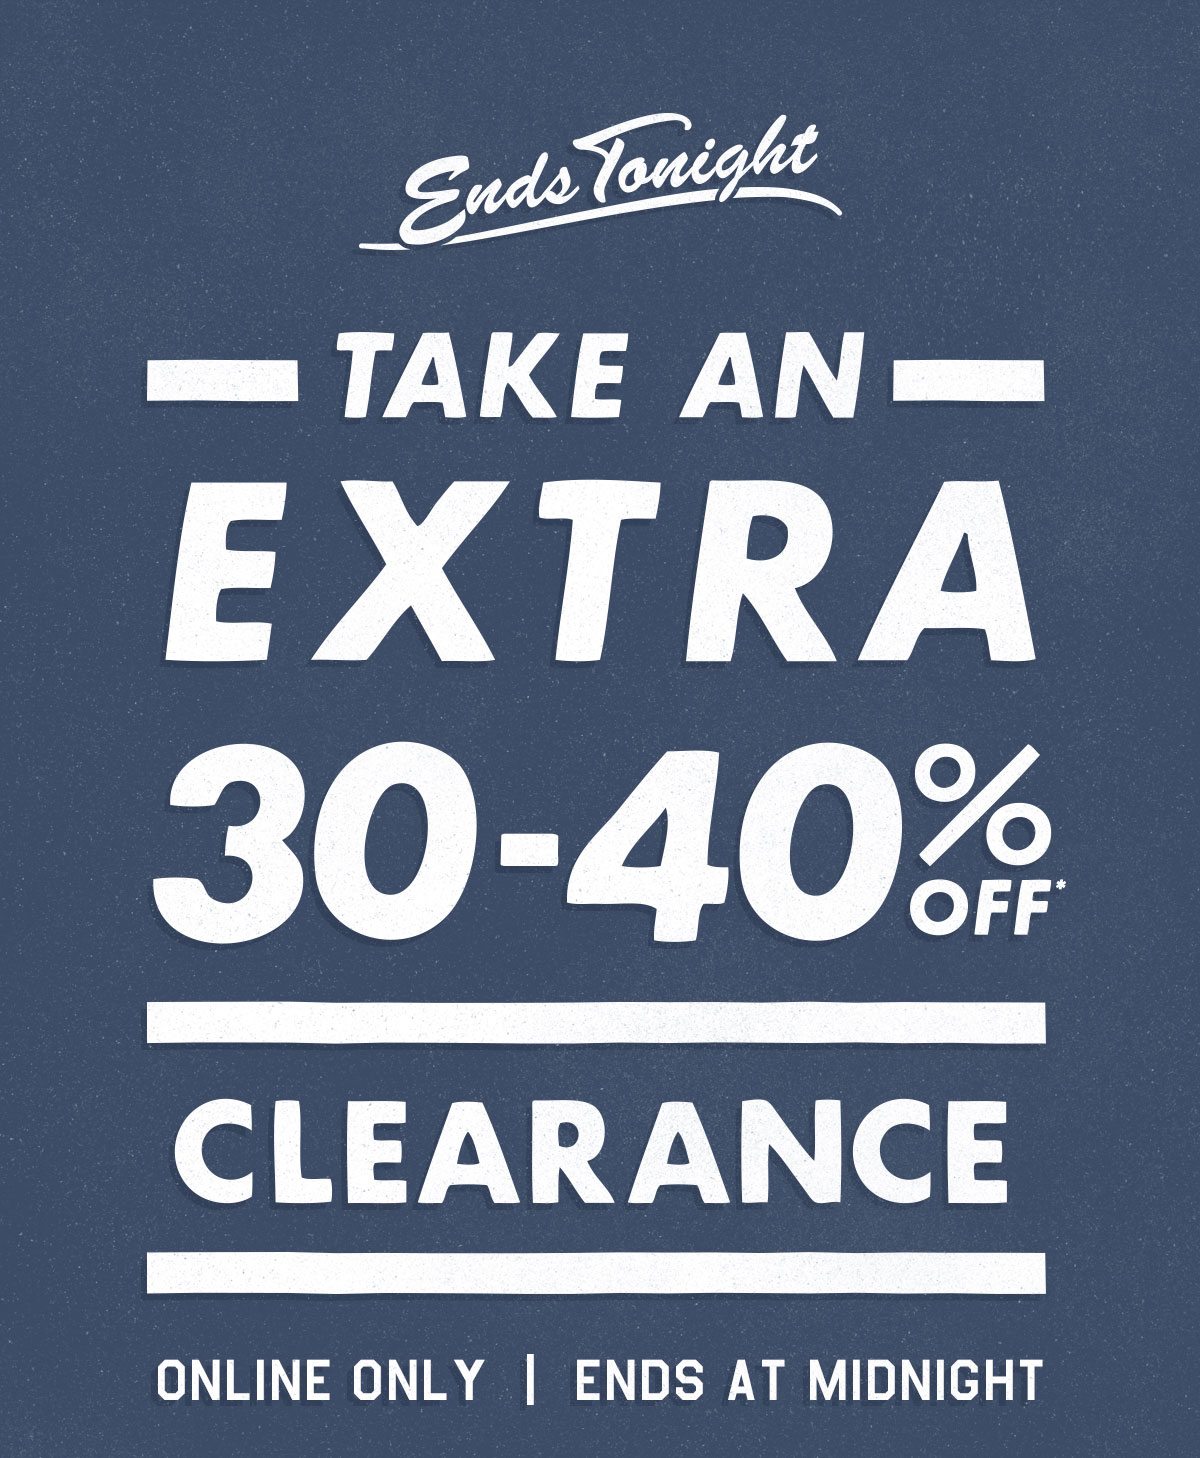 Ends tonight! Take an EXTRA 30%-40% off Clearance* online only. Last call, ends at midnight!